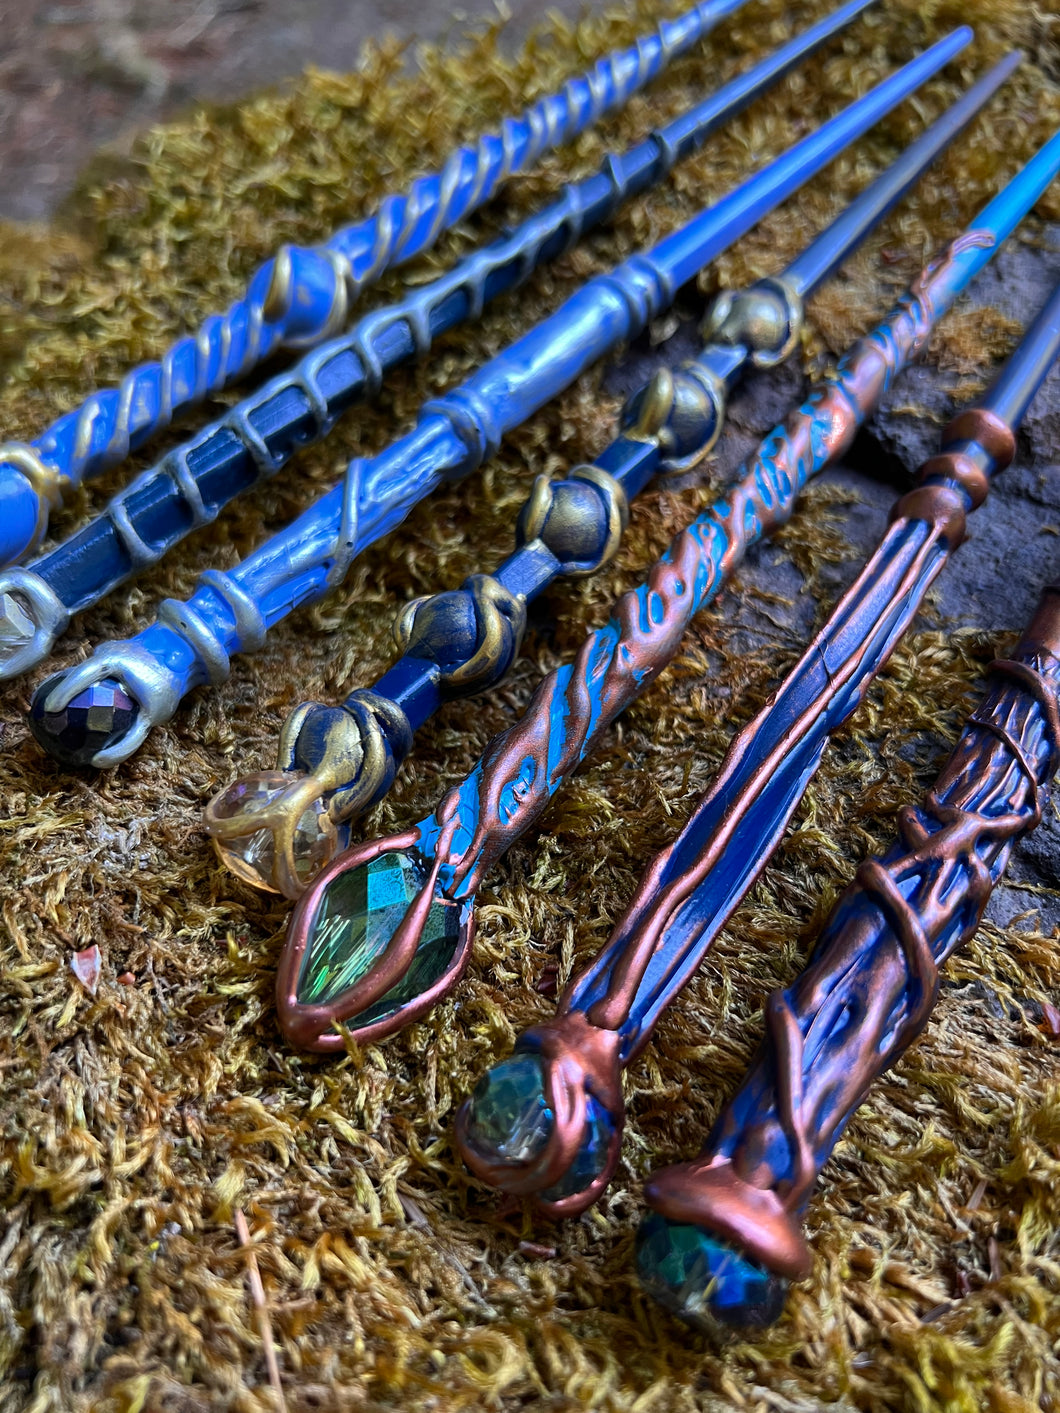 Wizard Wands of the Blue Variety